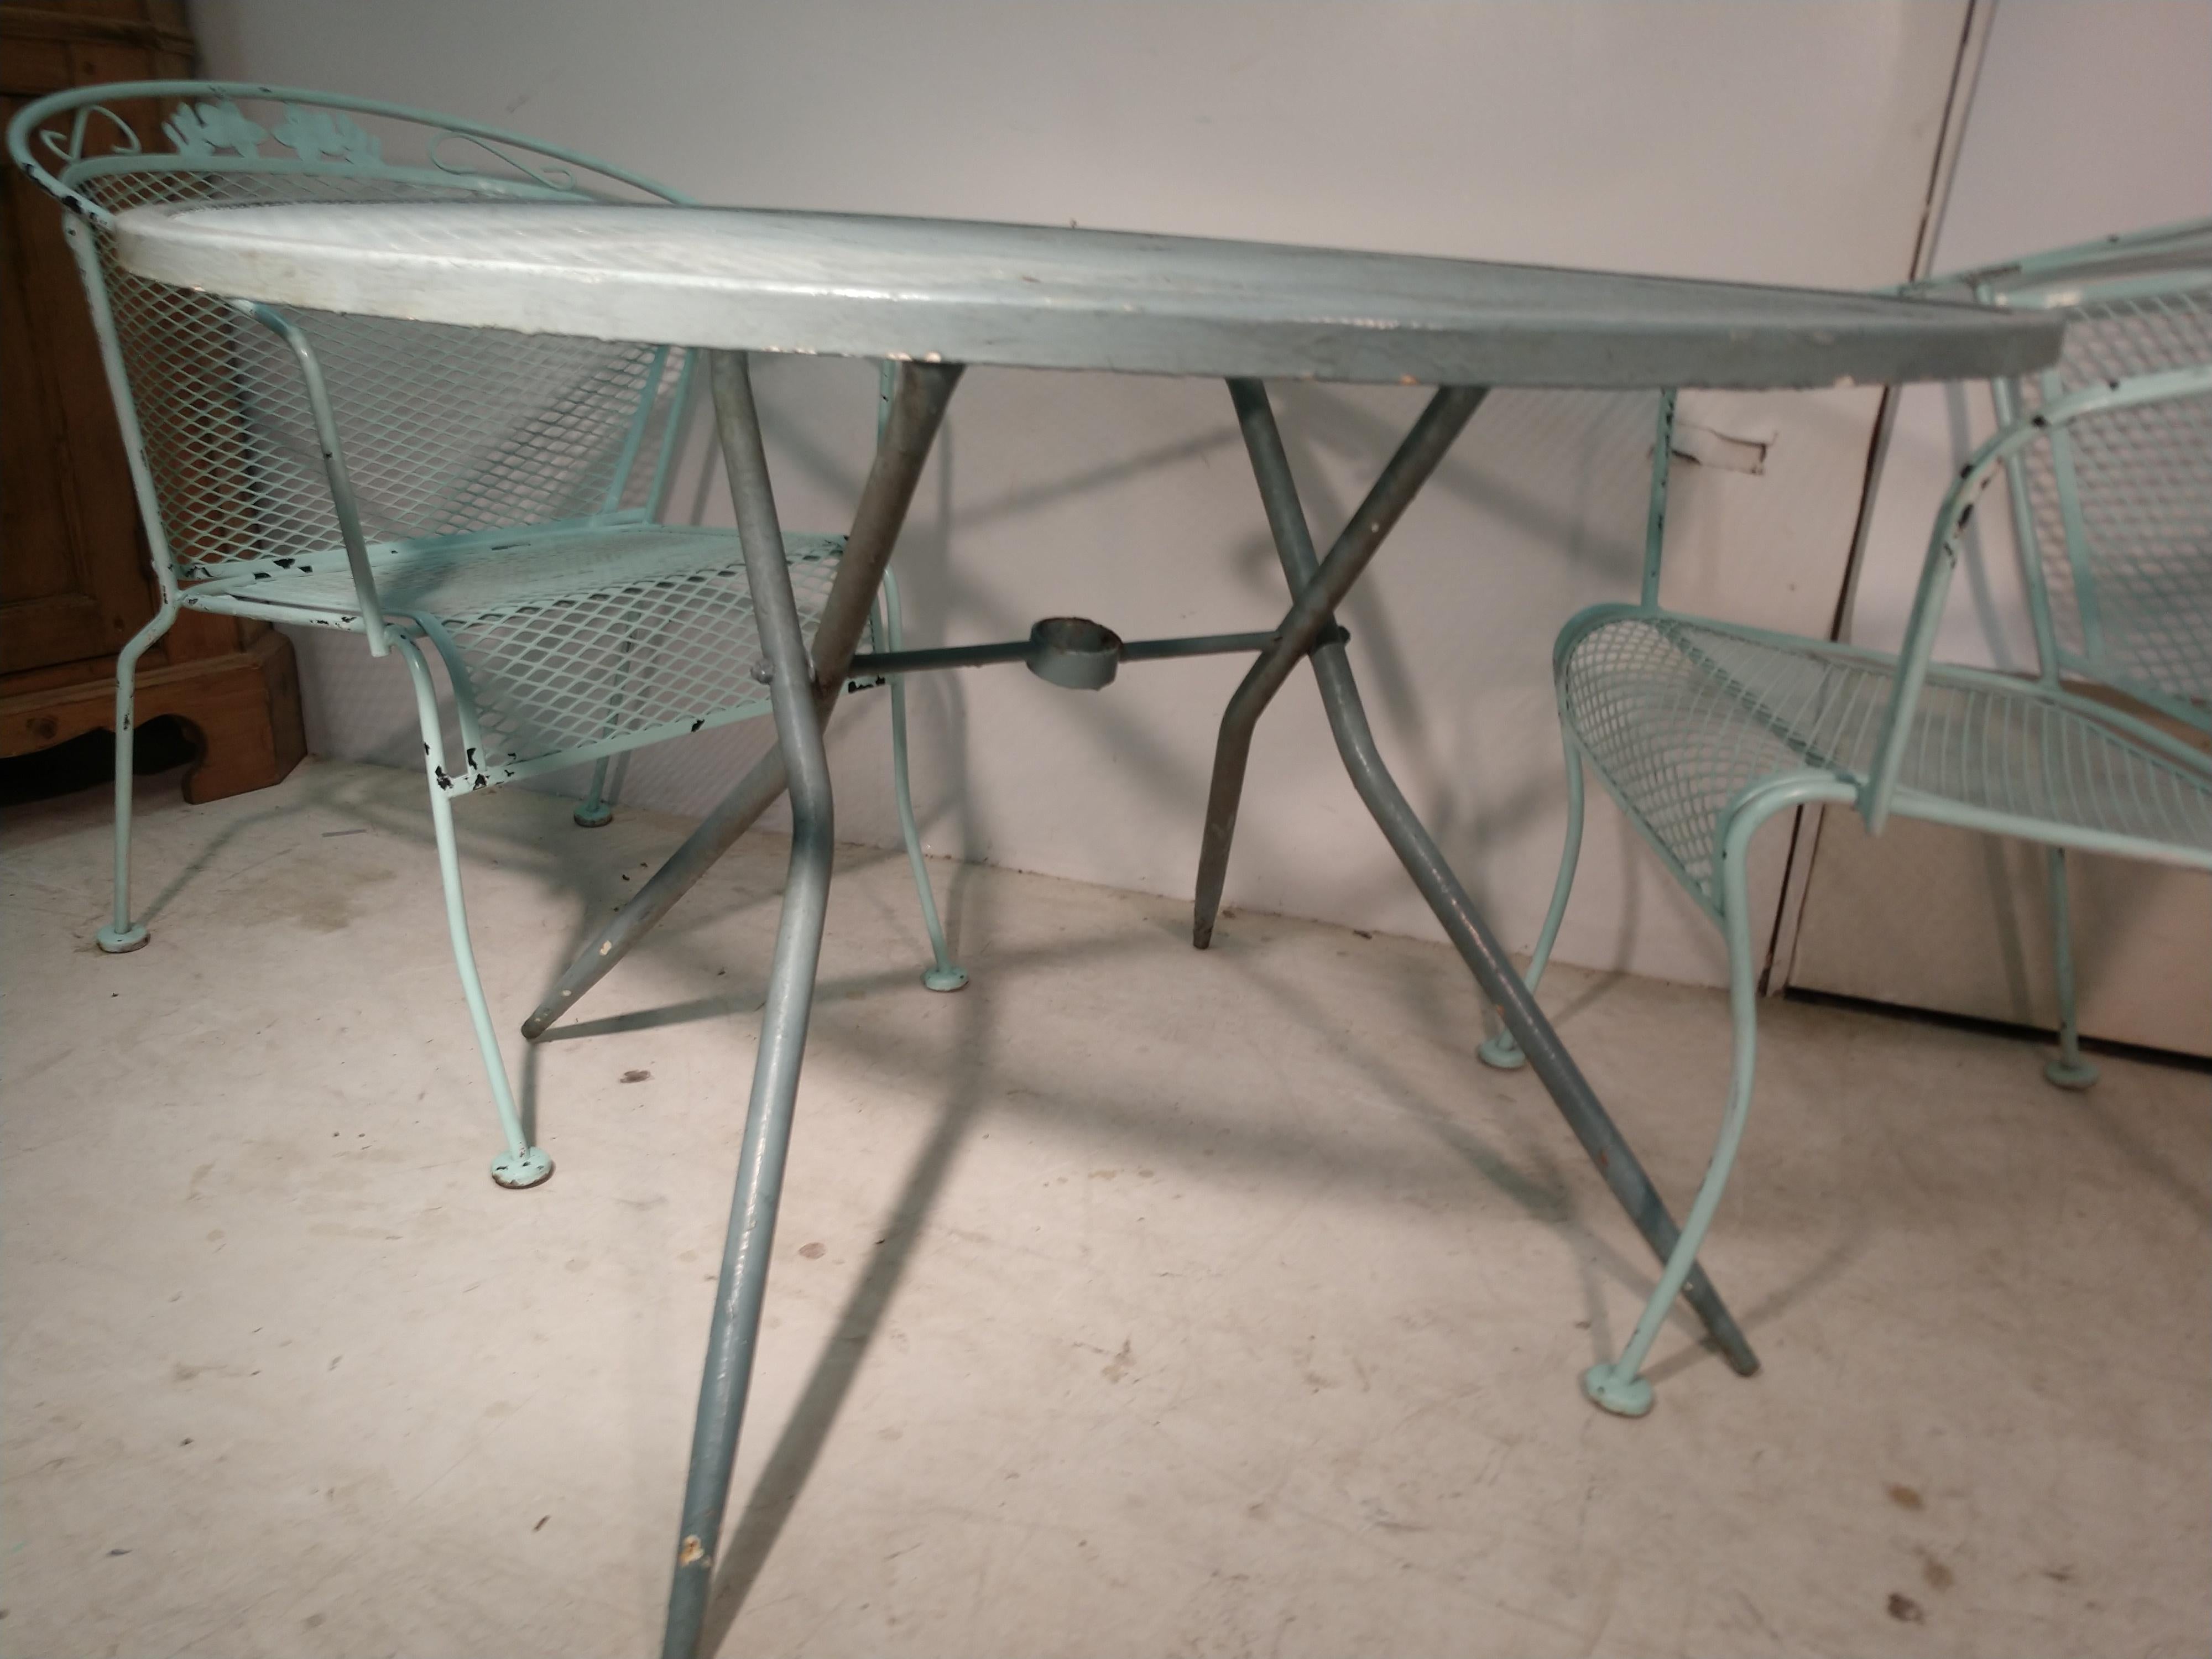 Fabulous set of 8 iron mesh chairs with arms from the Woodard Outdoor furniture co. circa 1960. Iron table with mesh top is 42in. round. Chairs are very comfortable and structurally sound with no rust.